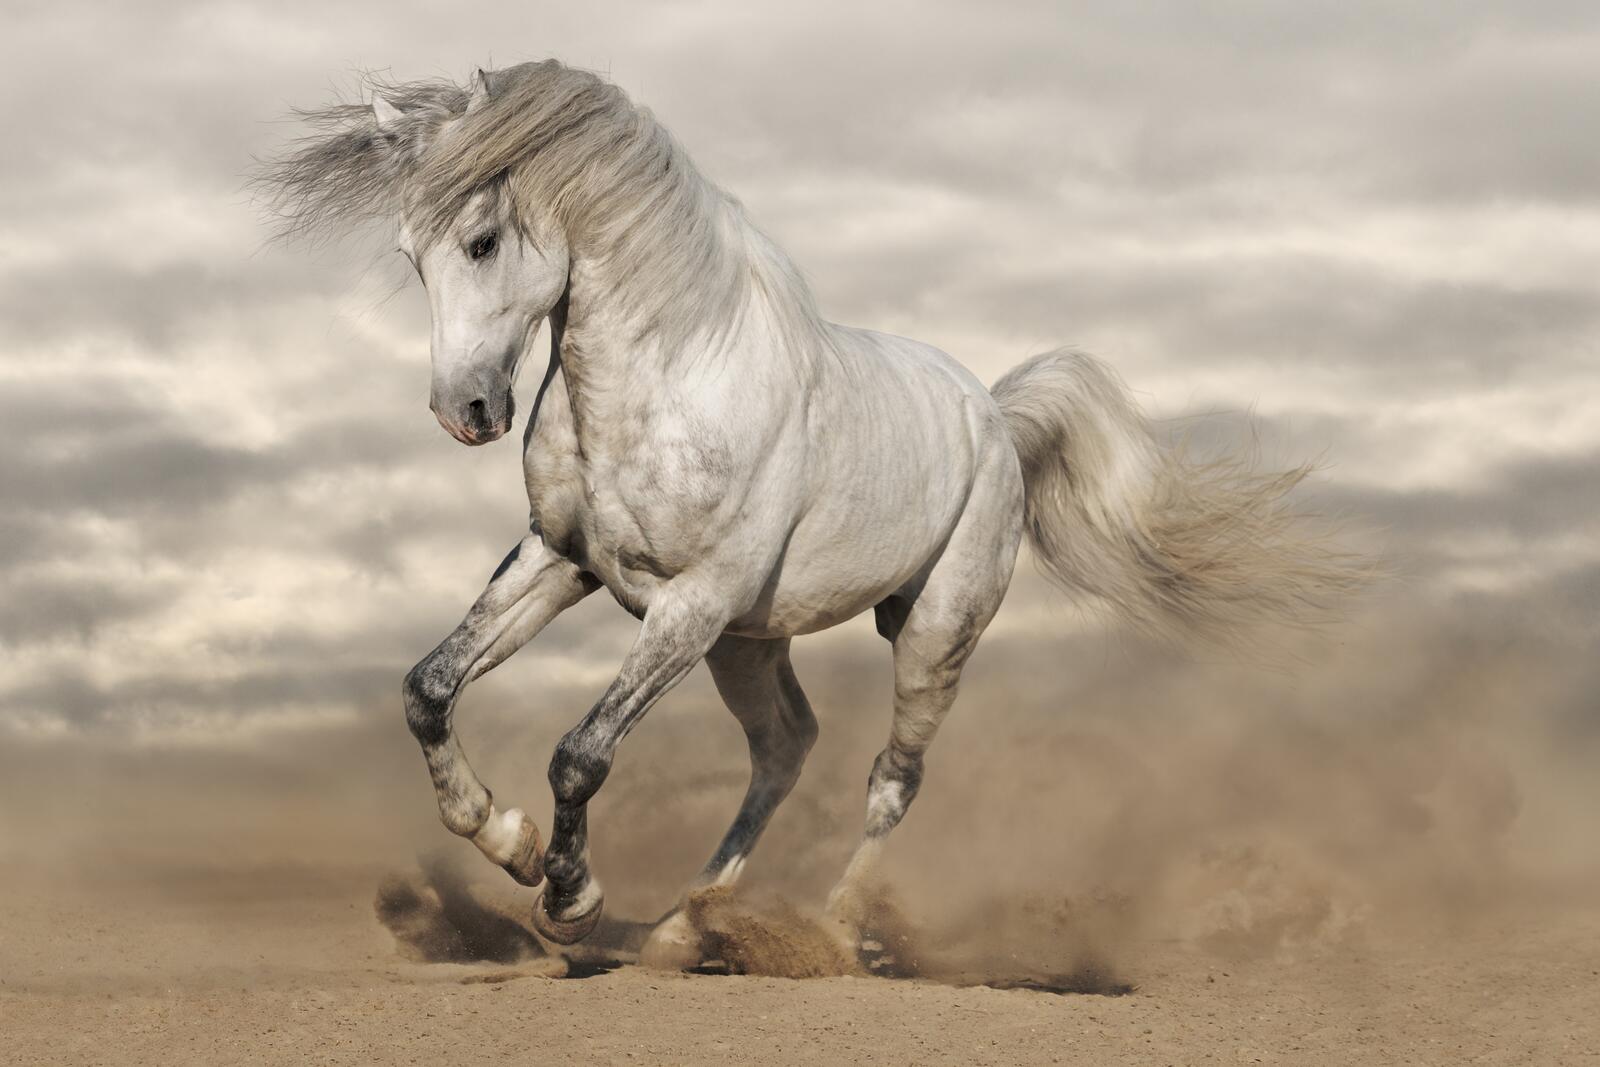 Wallpapers amazing beauty horse on the desktop